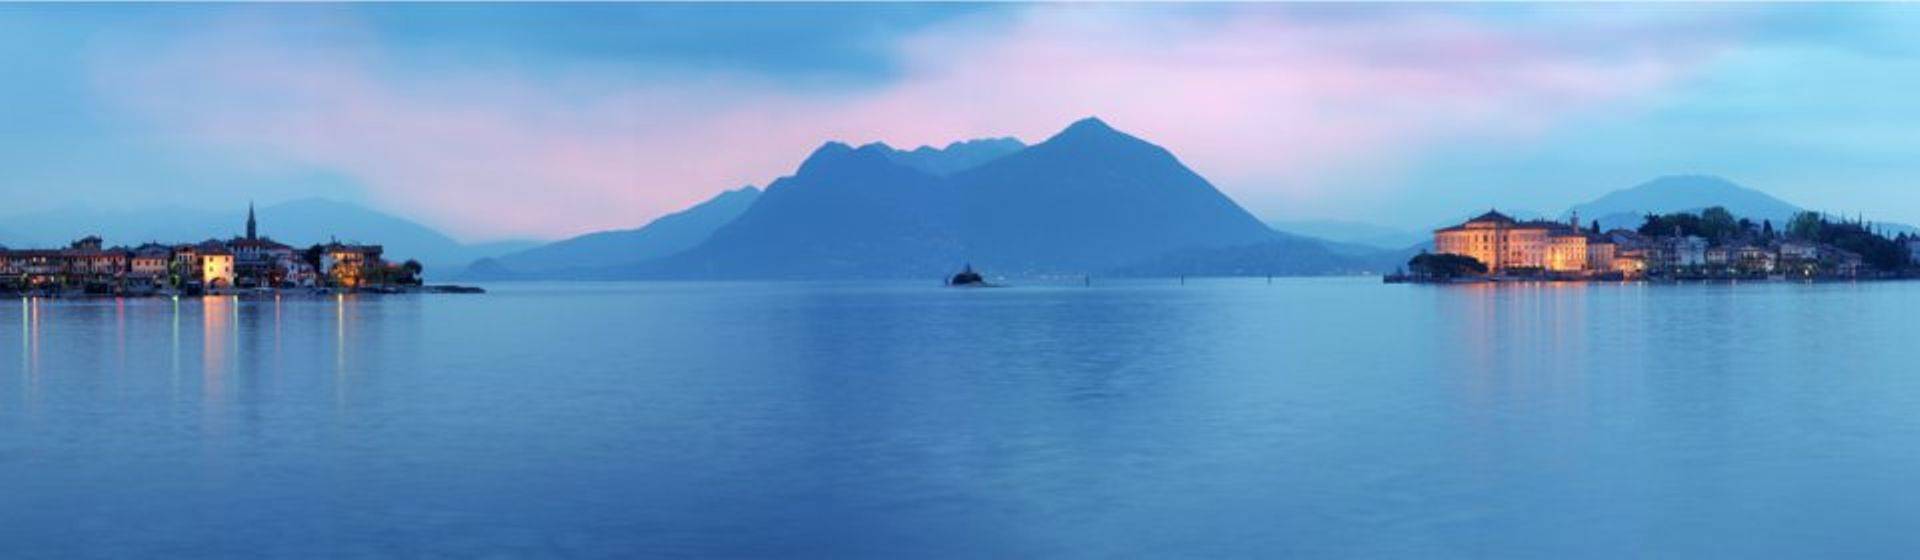 Holidays to Lake Maggiore Image